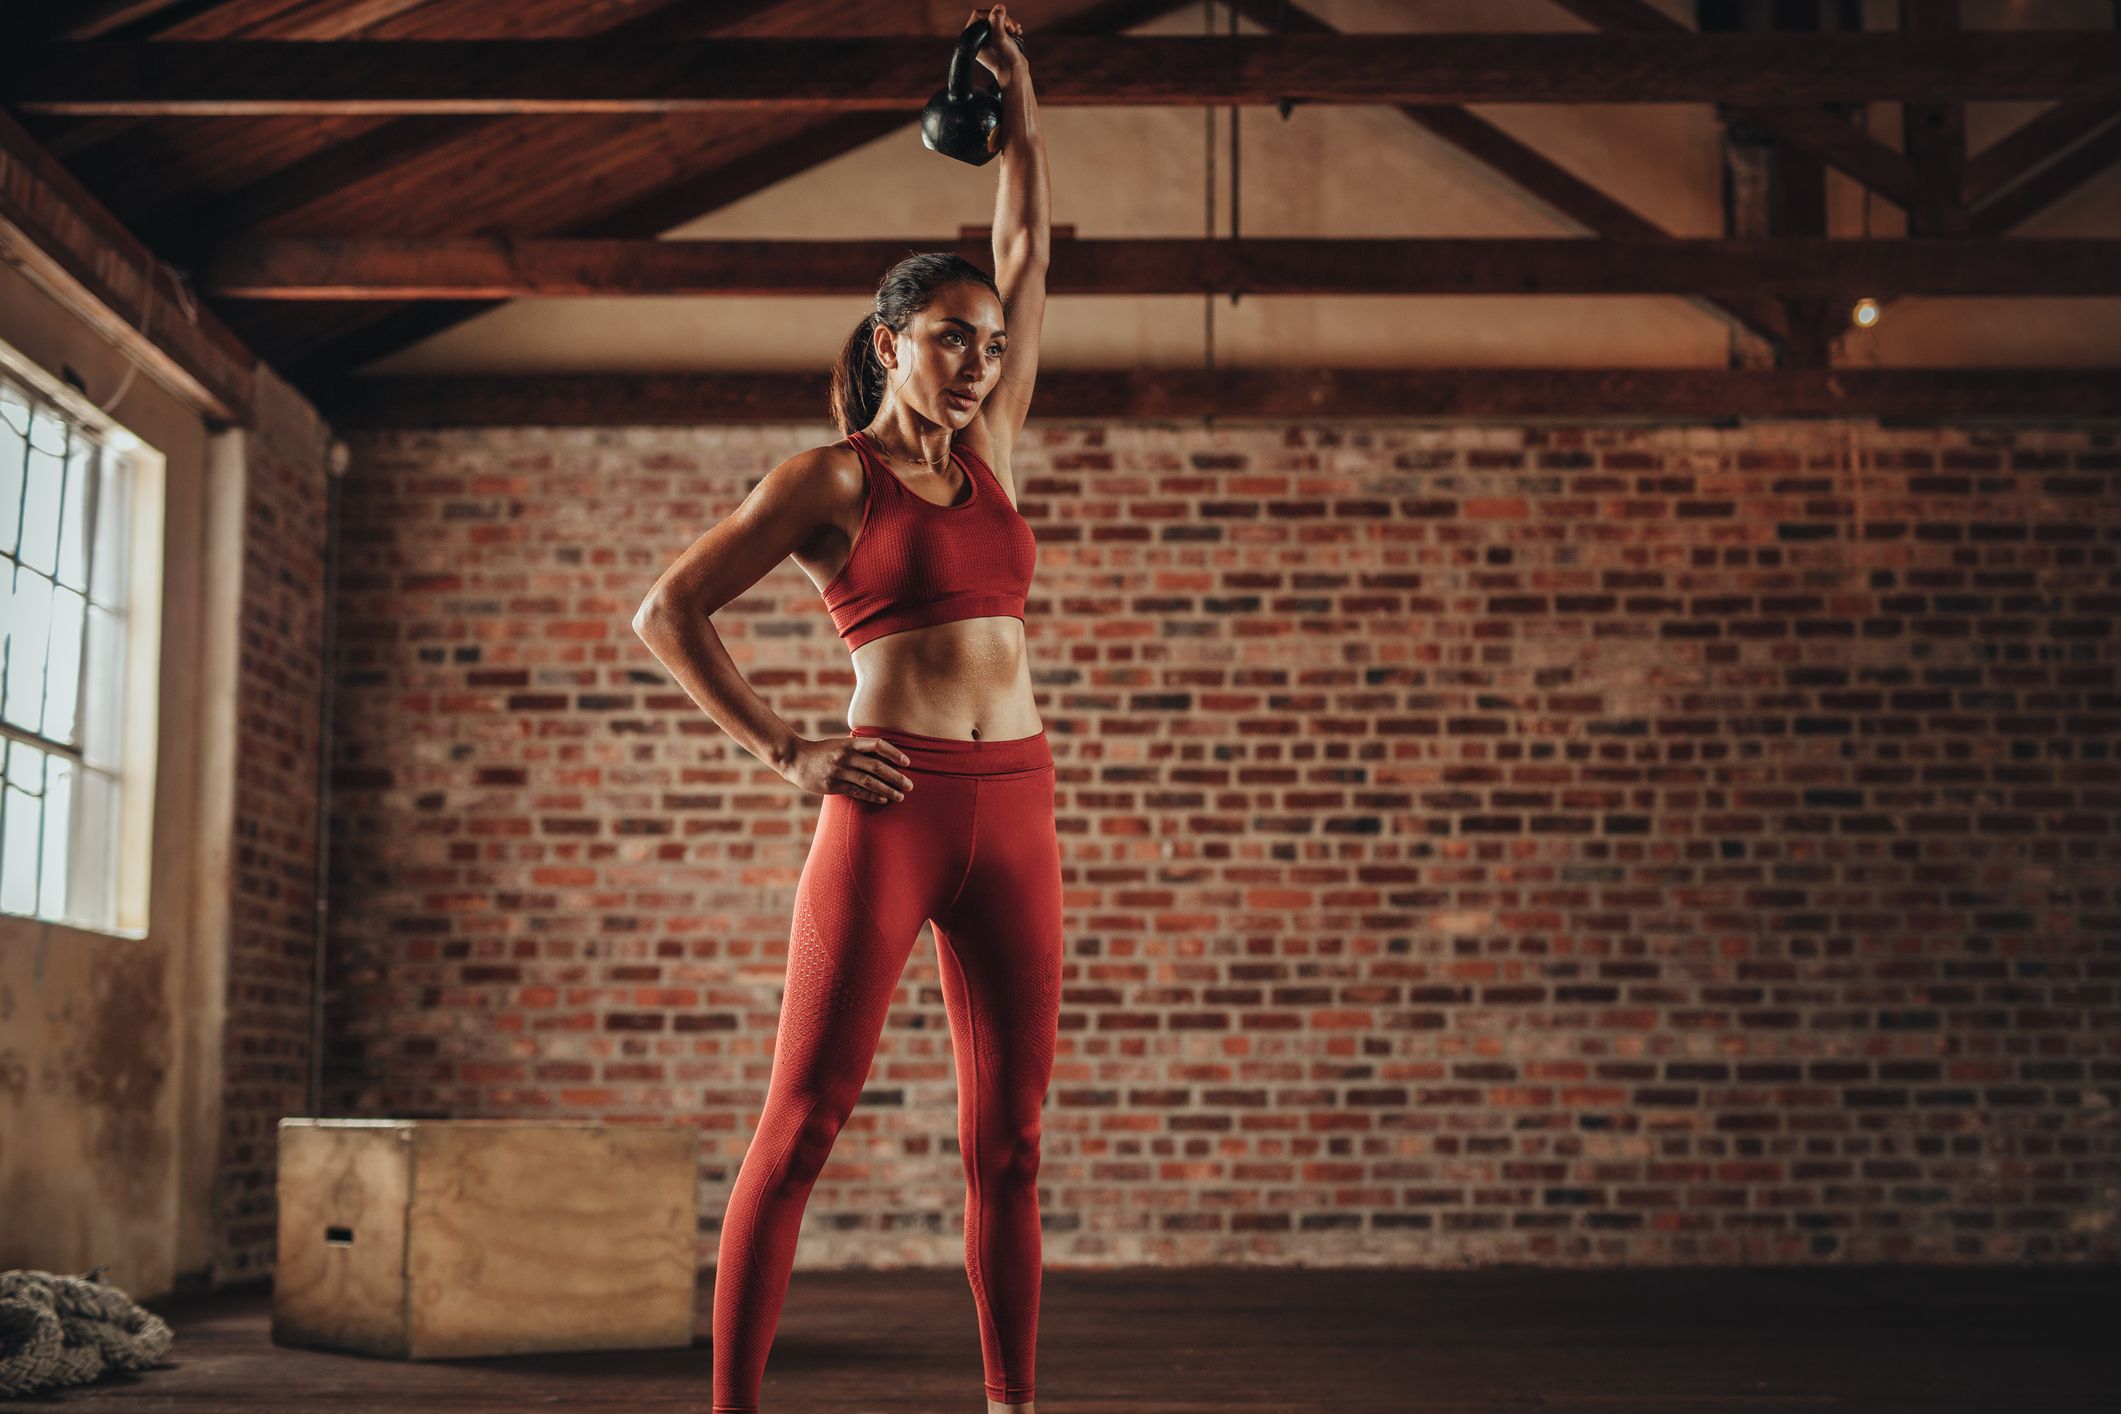 https://hips.hearstapps.com/hmg-prod/images/fitness-woman-doing-exercising-with-kettle-bell-royalty-free-image-1635538888.jpg